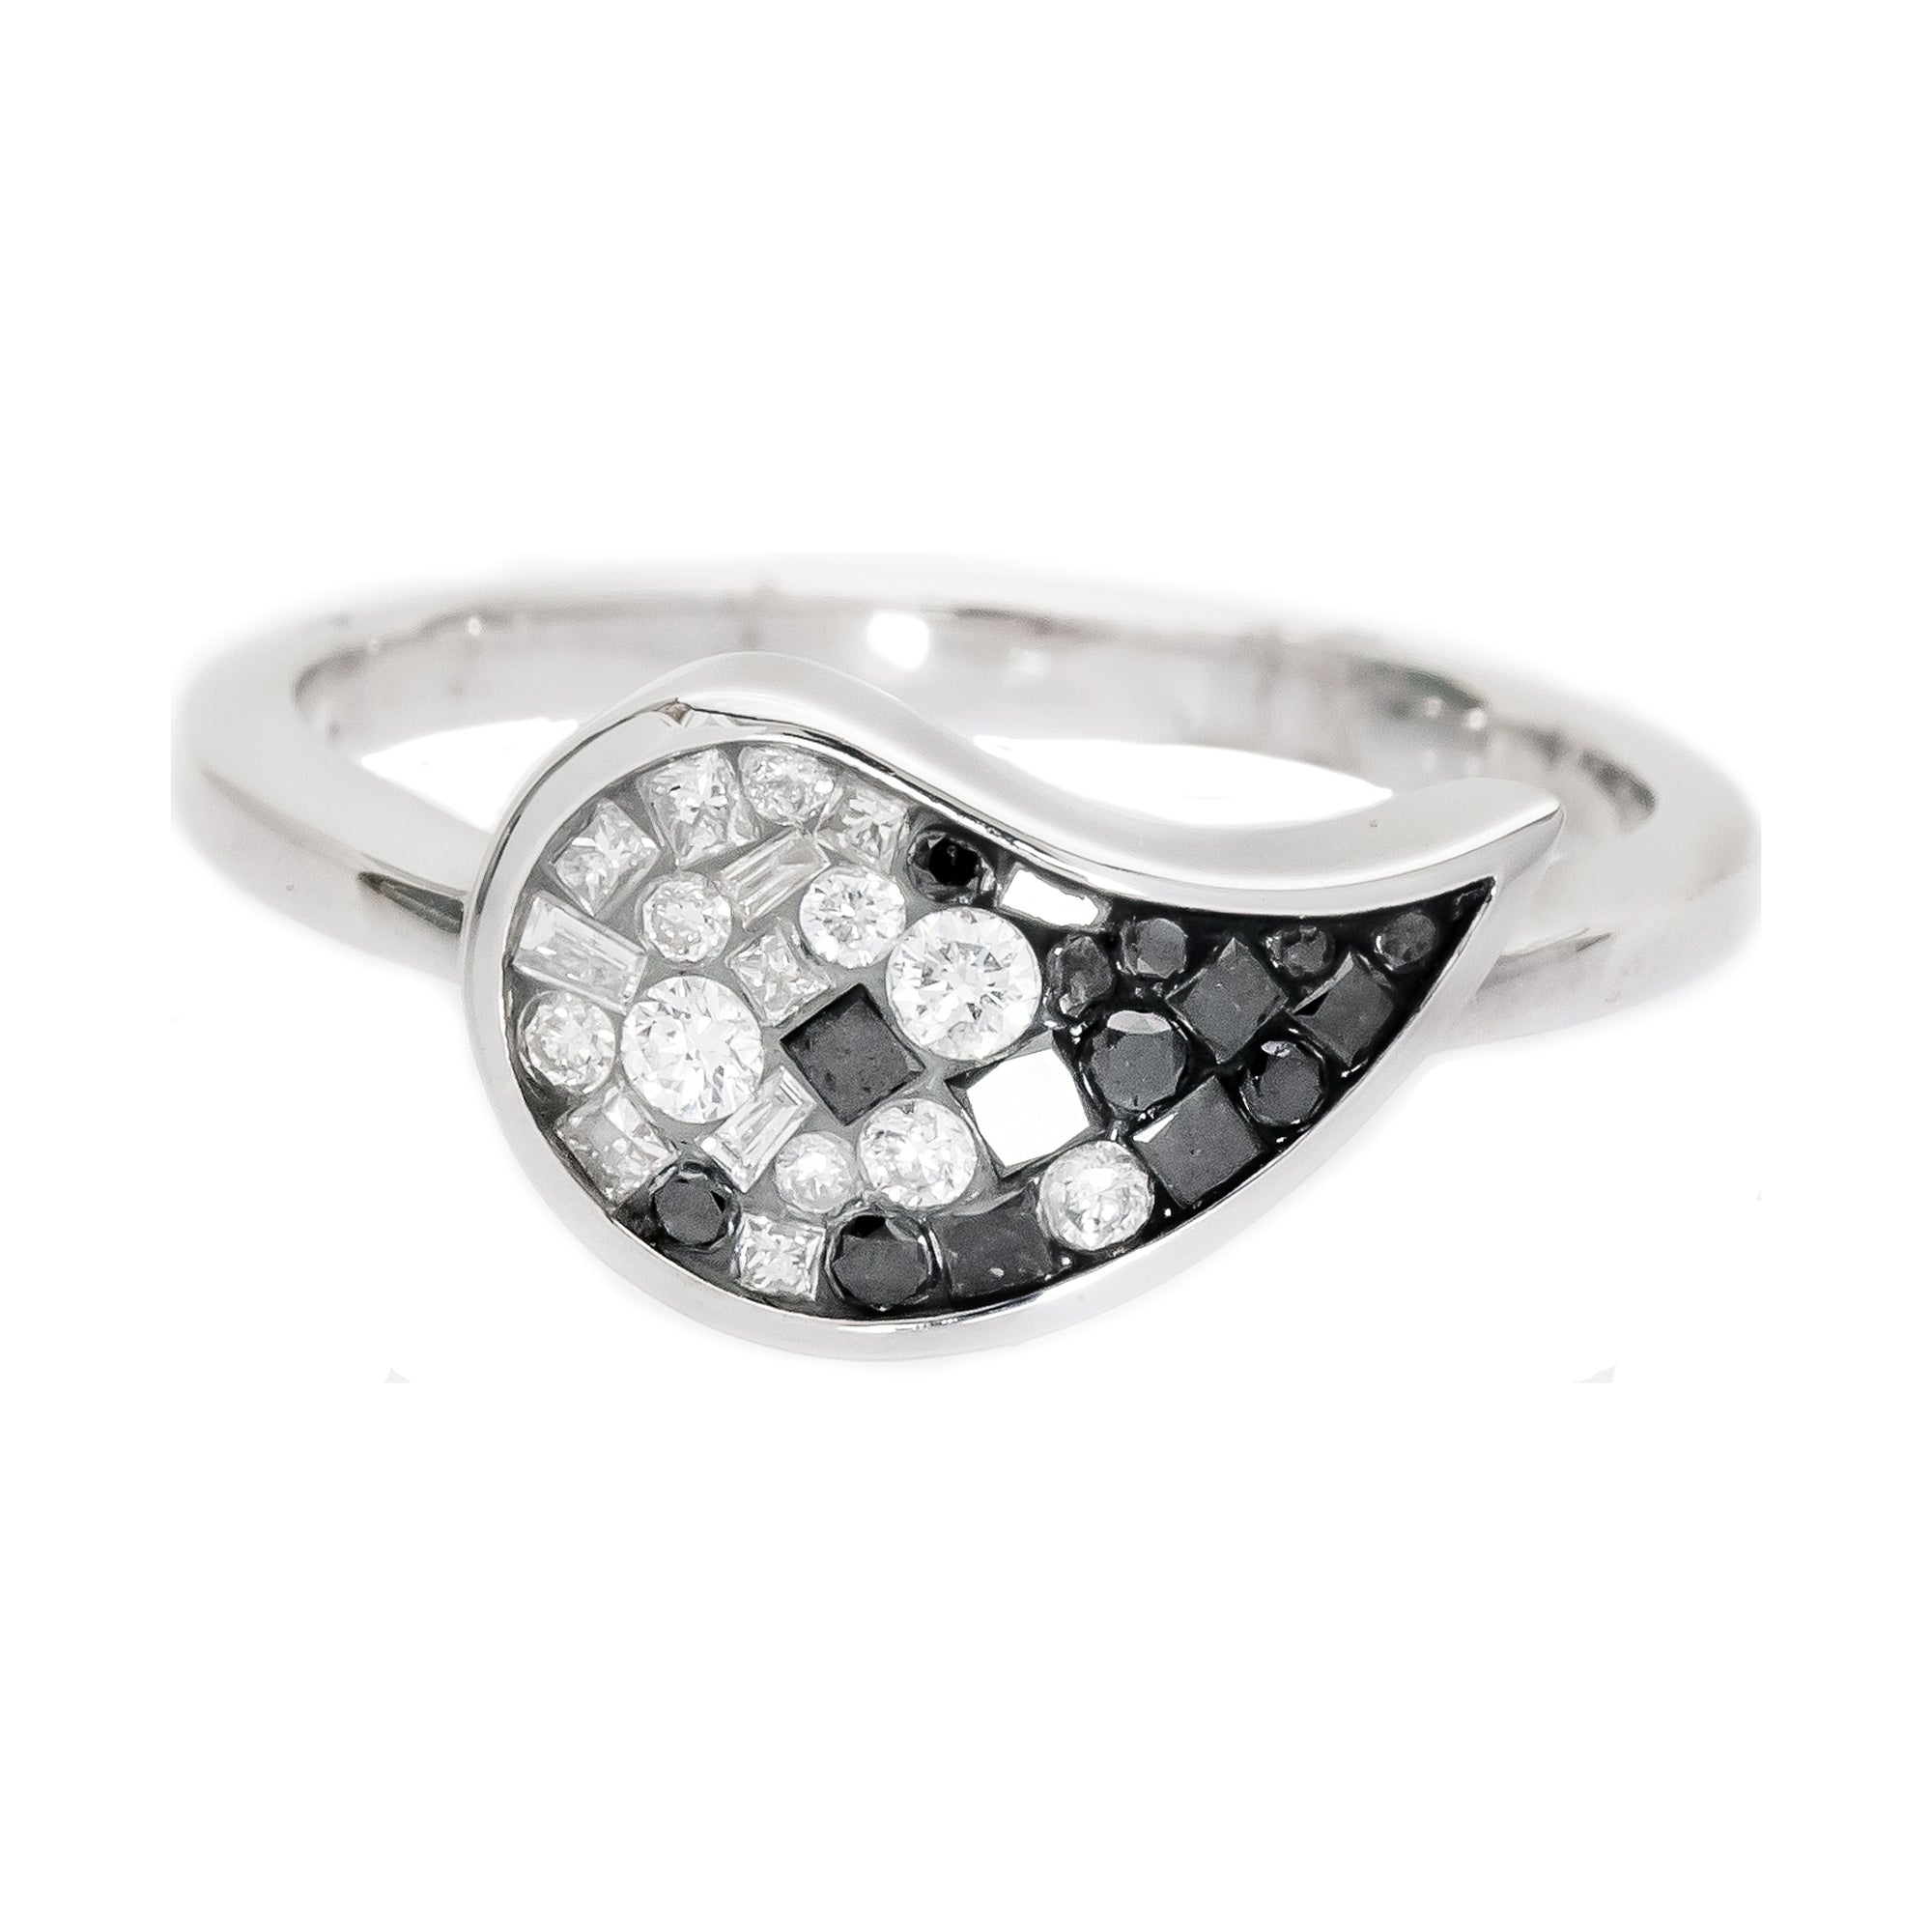 Black Ombre Paisley Diamond Ring by Pleve available at Talisman Collection Fine Jewelers in El Dorado Hills, CA and online. Specs: 18k wg dia & color enhanced dia .45 cttw. 